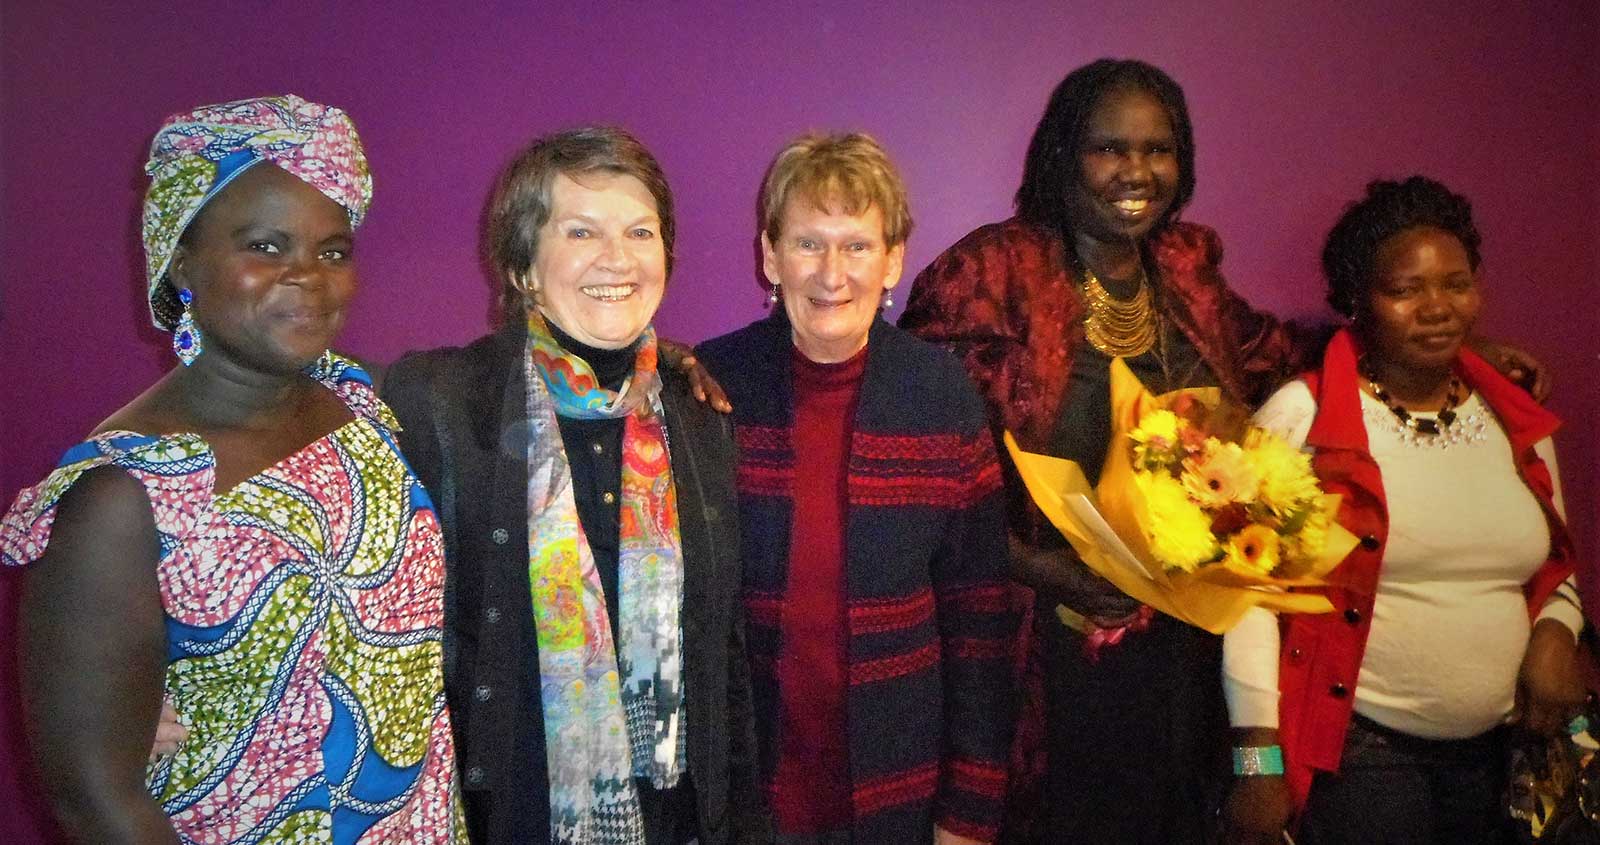 Constance (star of the film 'Constance on the Edge') (left) with memebers of the Wagga Wagga group (middle) and Contances' family members far right